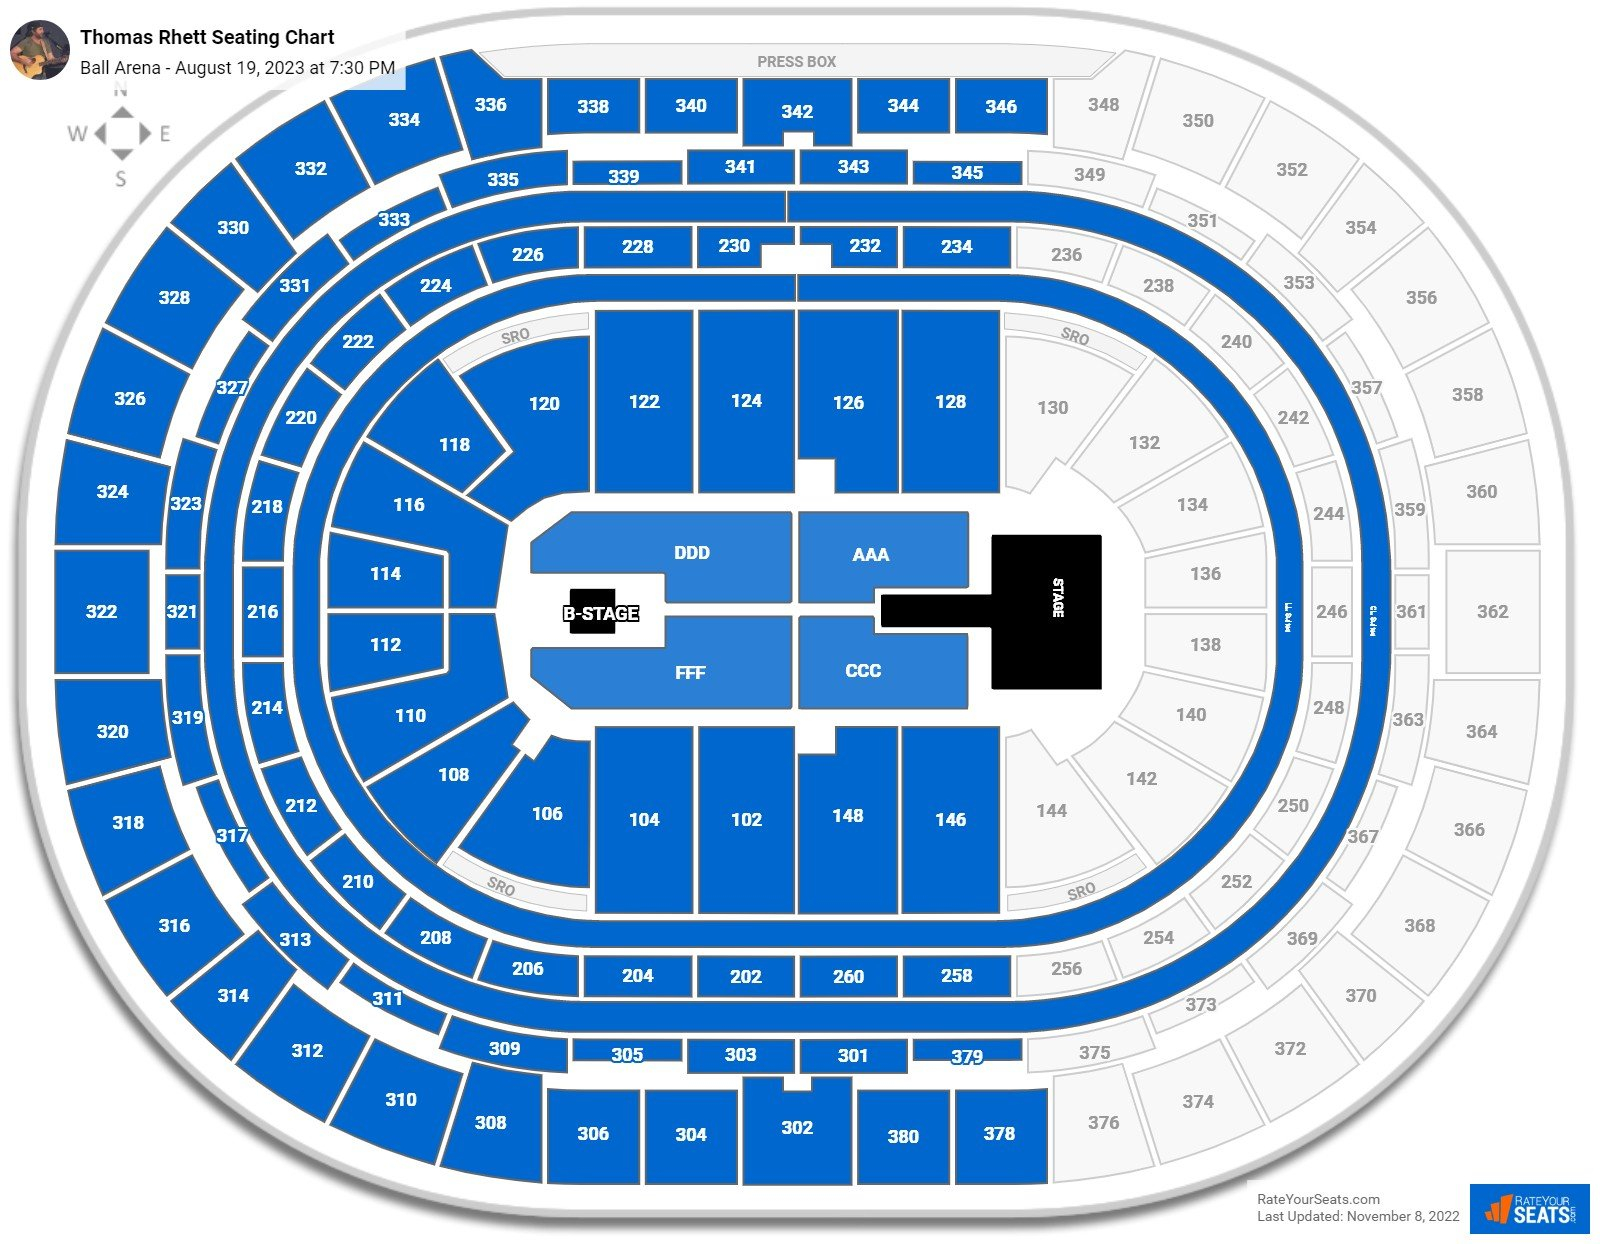 Ball Arena Denver Concert Seating Chart - Arena Seating Chart